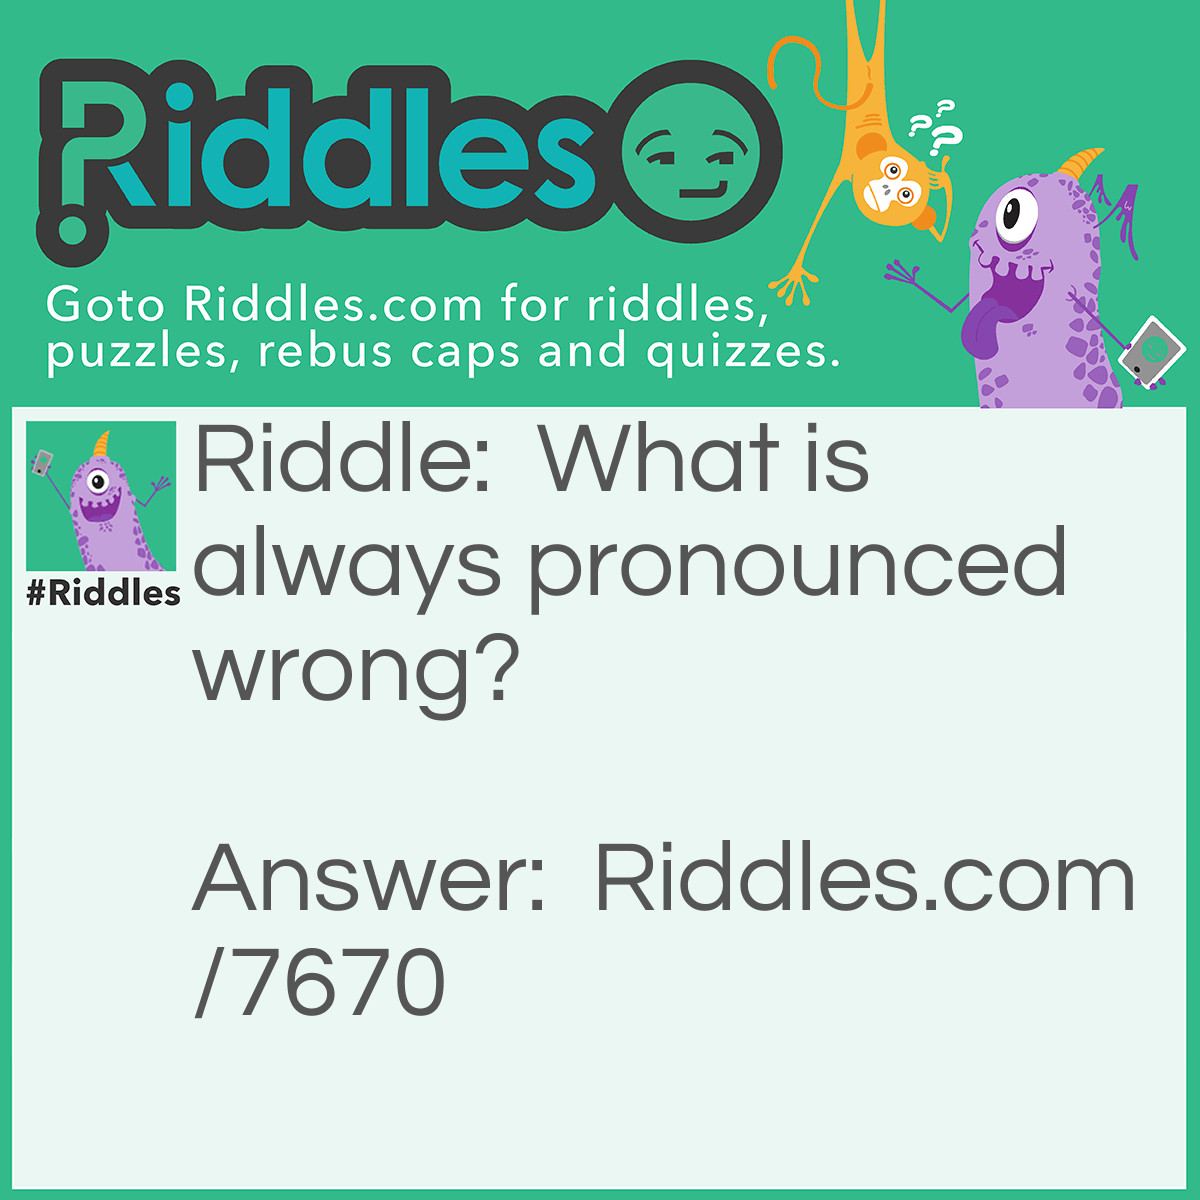 Riddle: What is always pronounced wrong? Answer: Wrong.